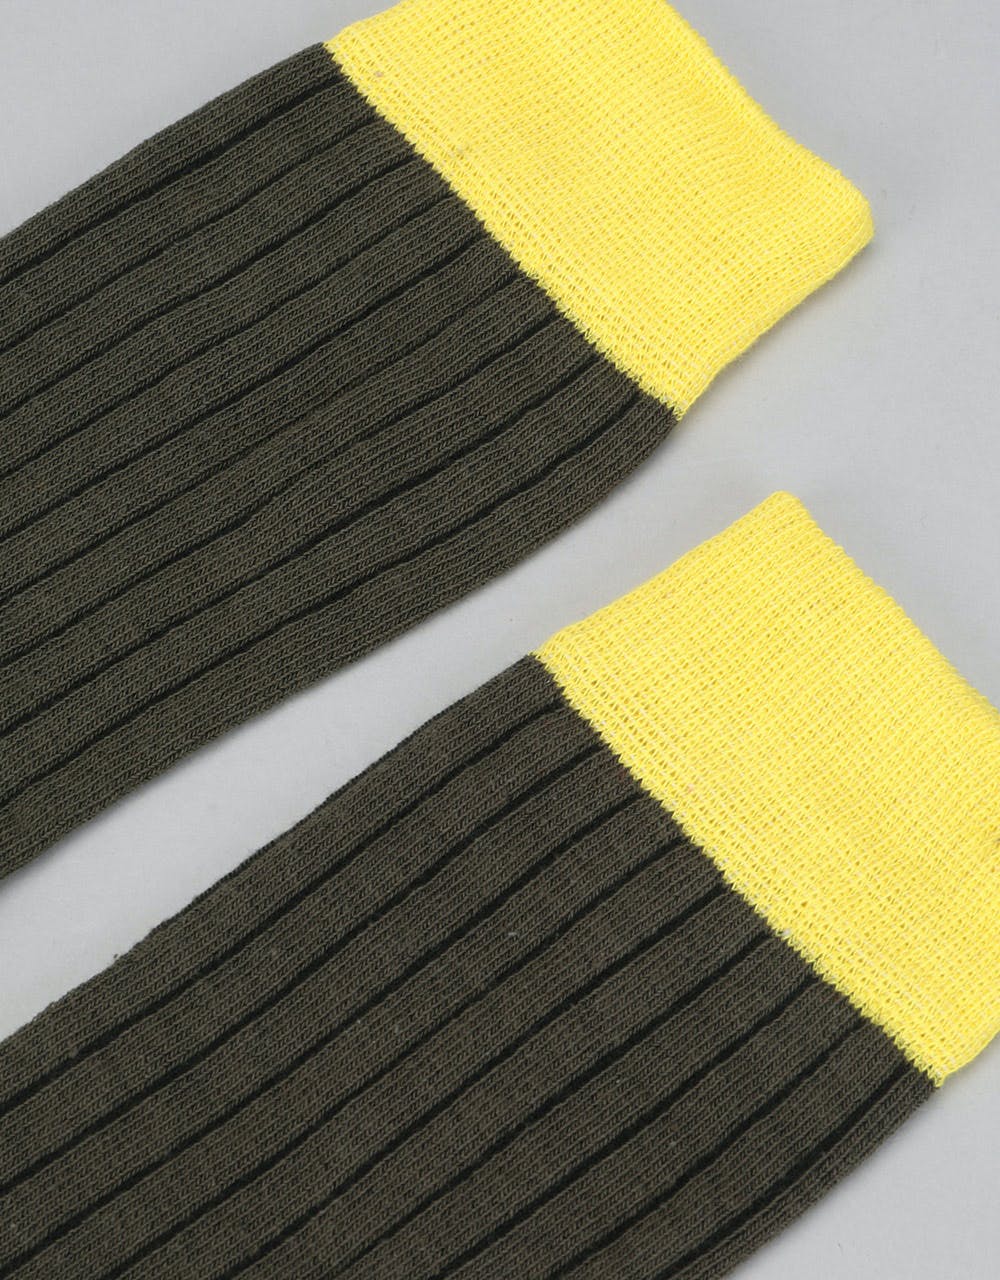 Route One Derby Socks - Brown/Yellow